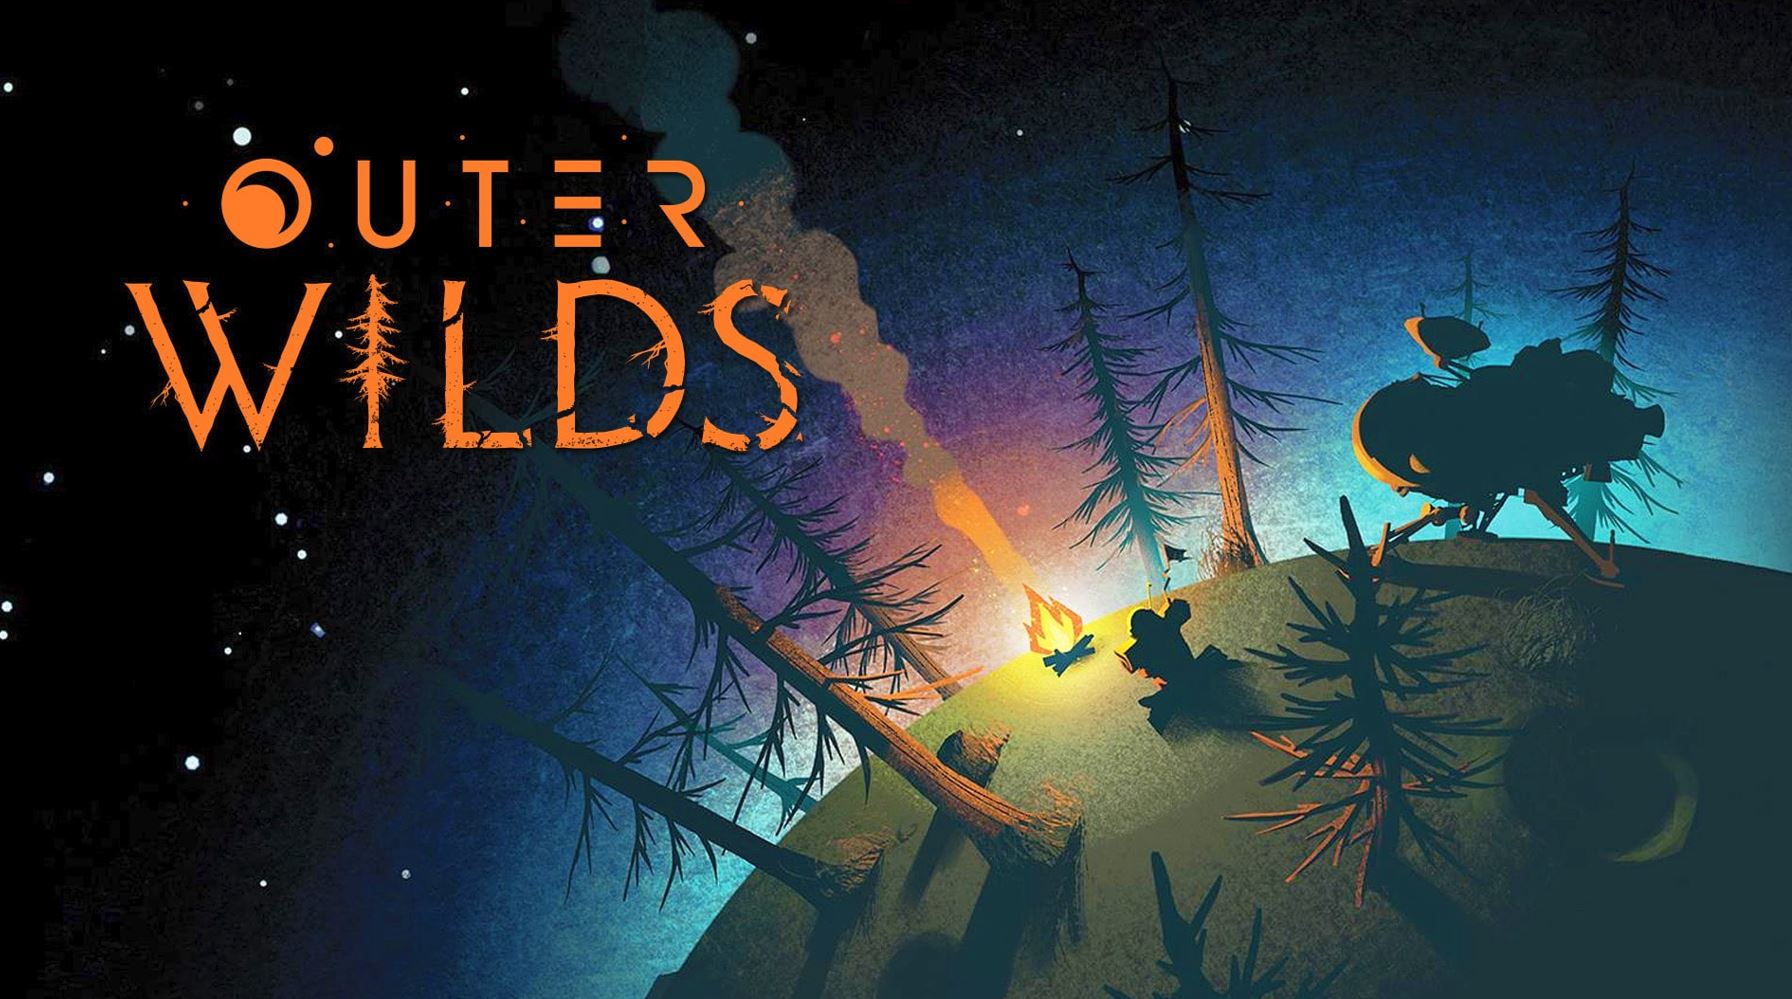 The cover of Outer Wilds (2019). Depicts a spaceship on a grassy planet with trees, with a person sitting at a campfire. The title Outer Wilds is in the top left corner.